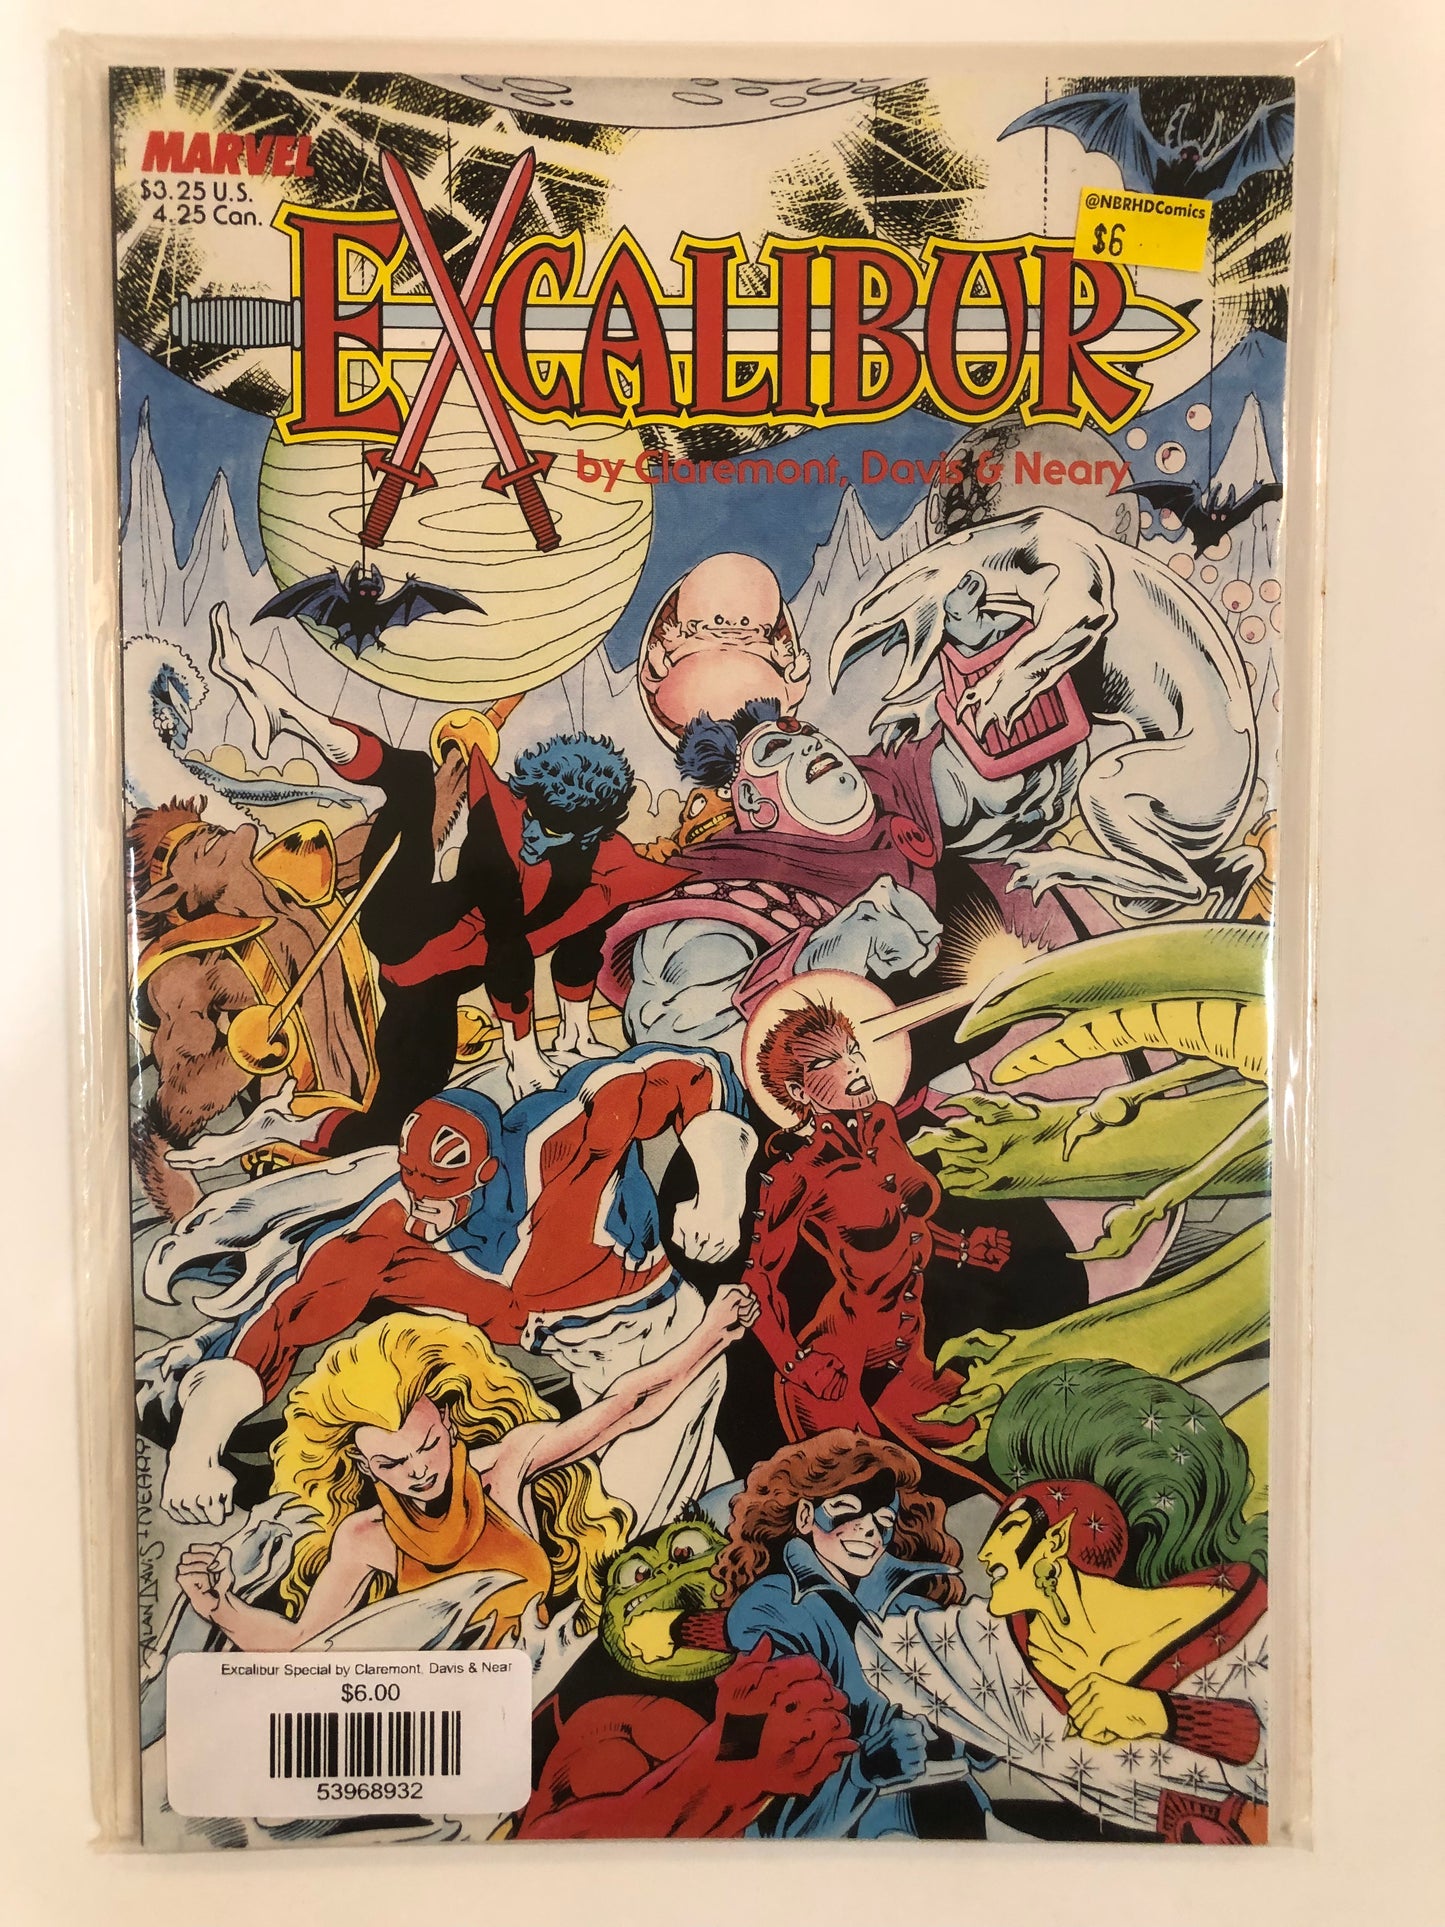 Excalibur Special by Claremont, Davis & Neary